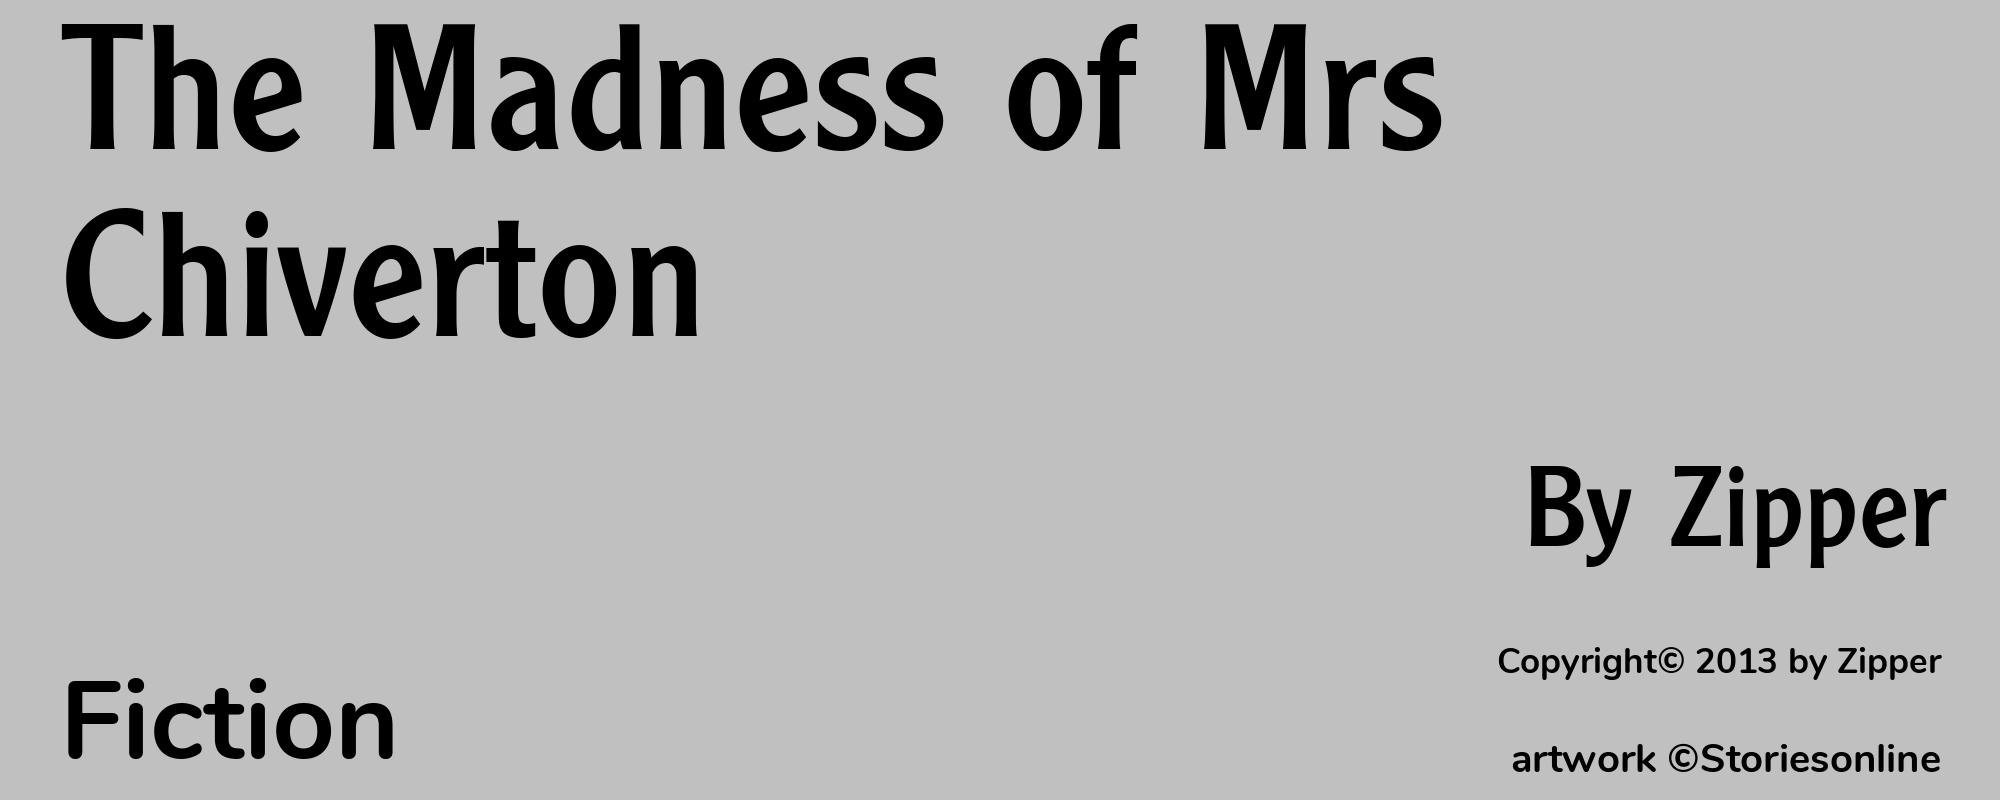 The Madness of Mrs Chiverton - Cover